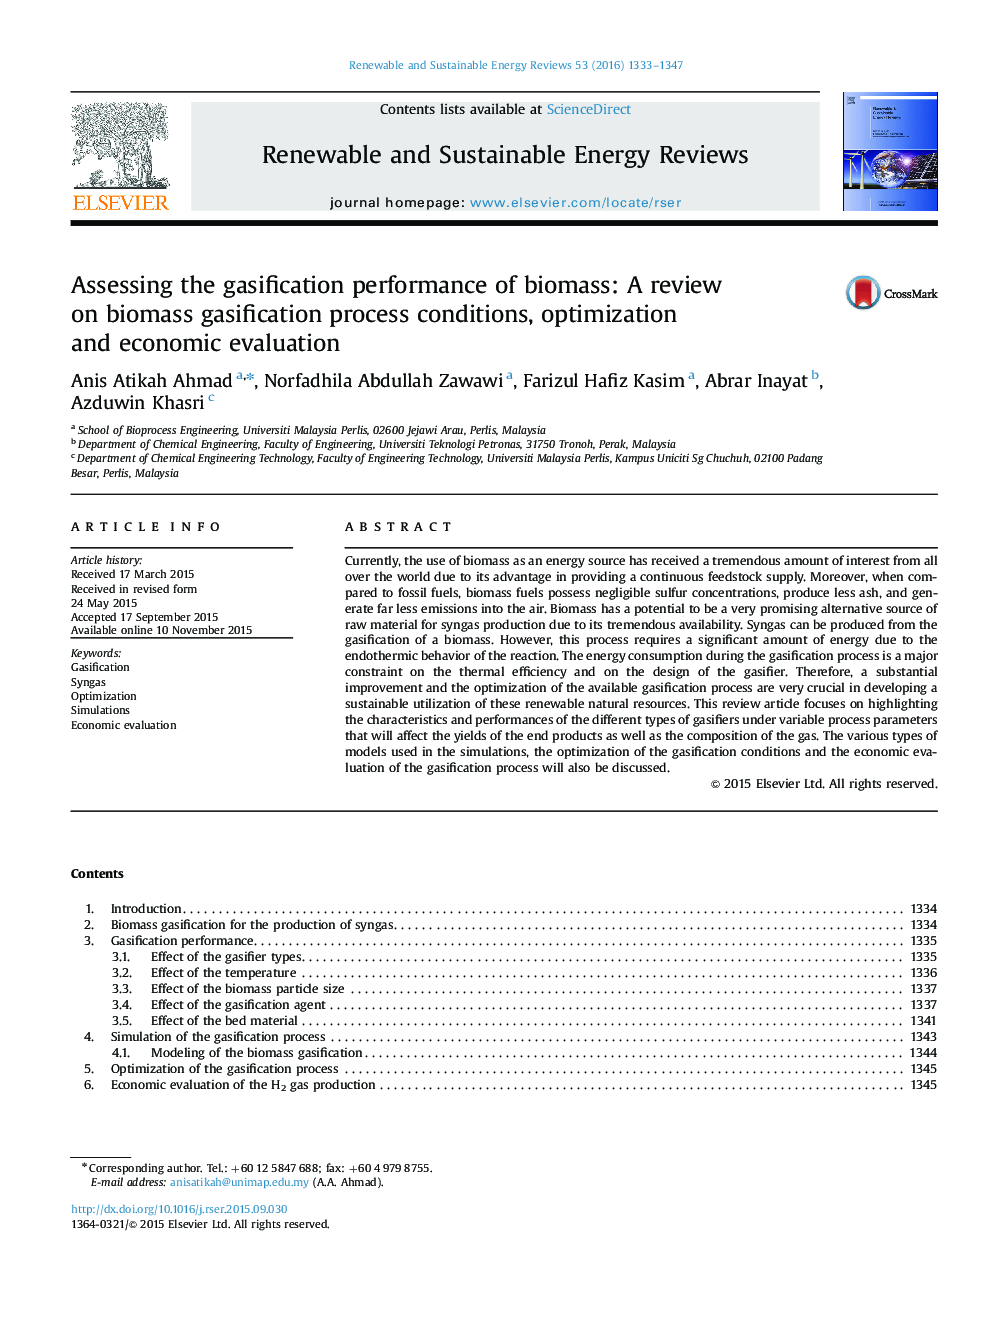 Assessing the gasification performance of biomass: A review on biomass gasification process conditions, optimization and economic evaluation